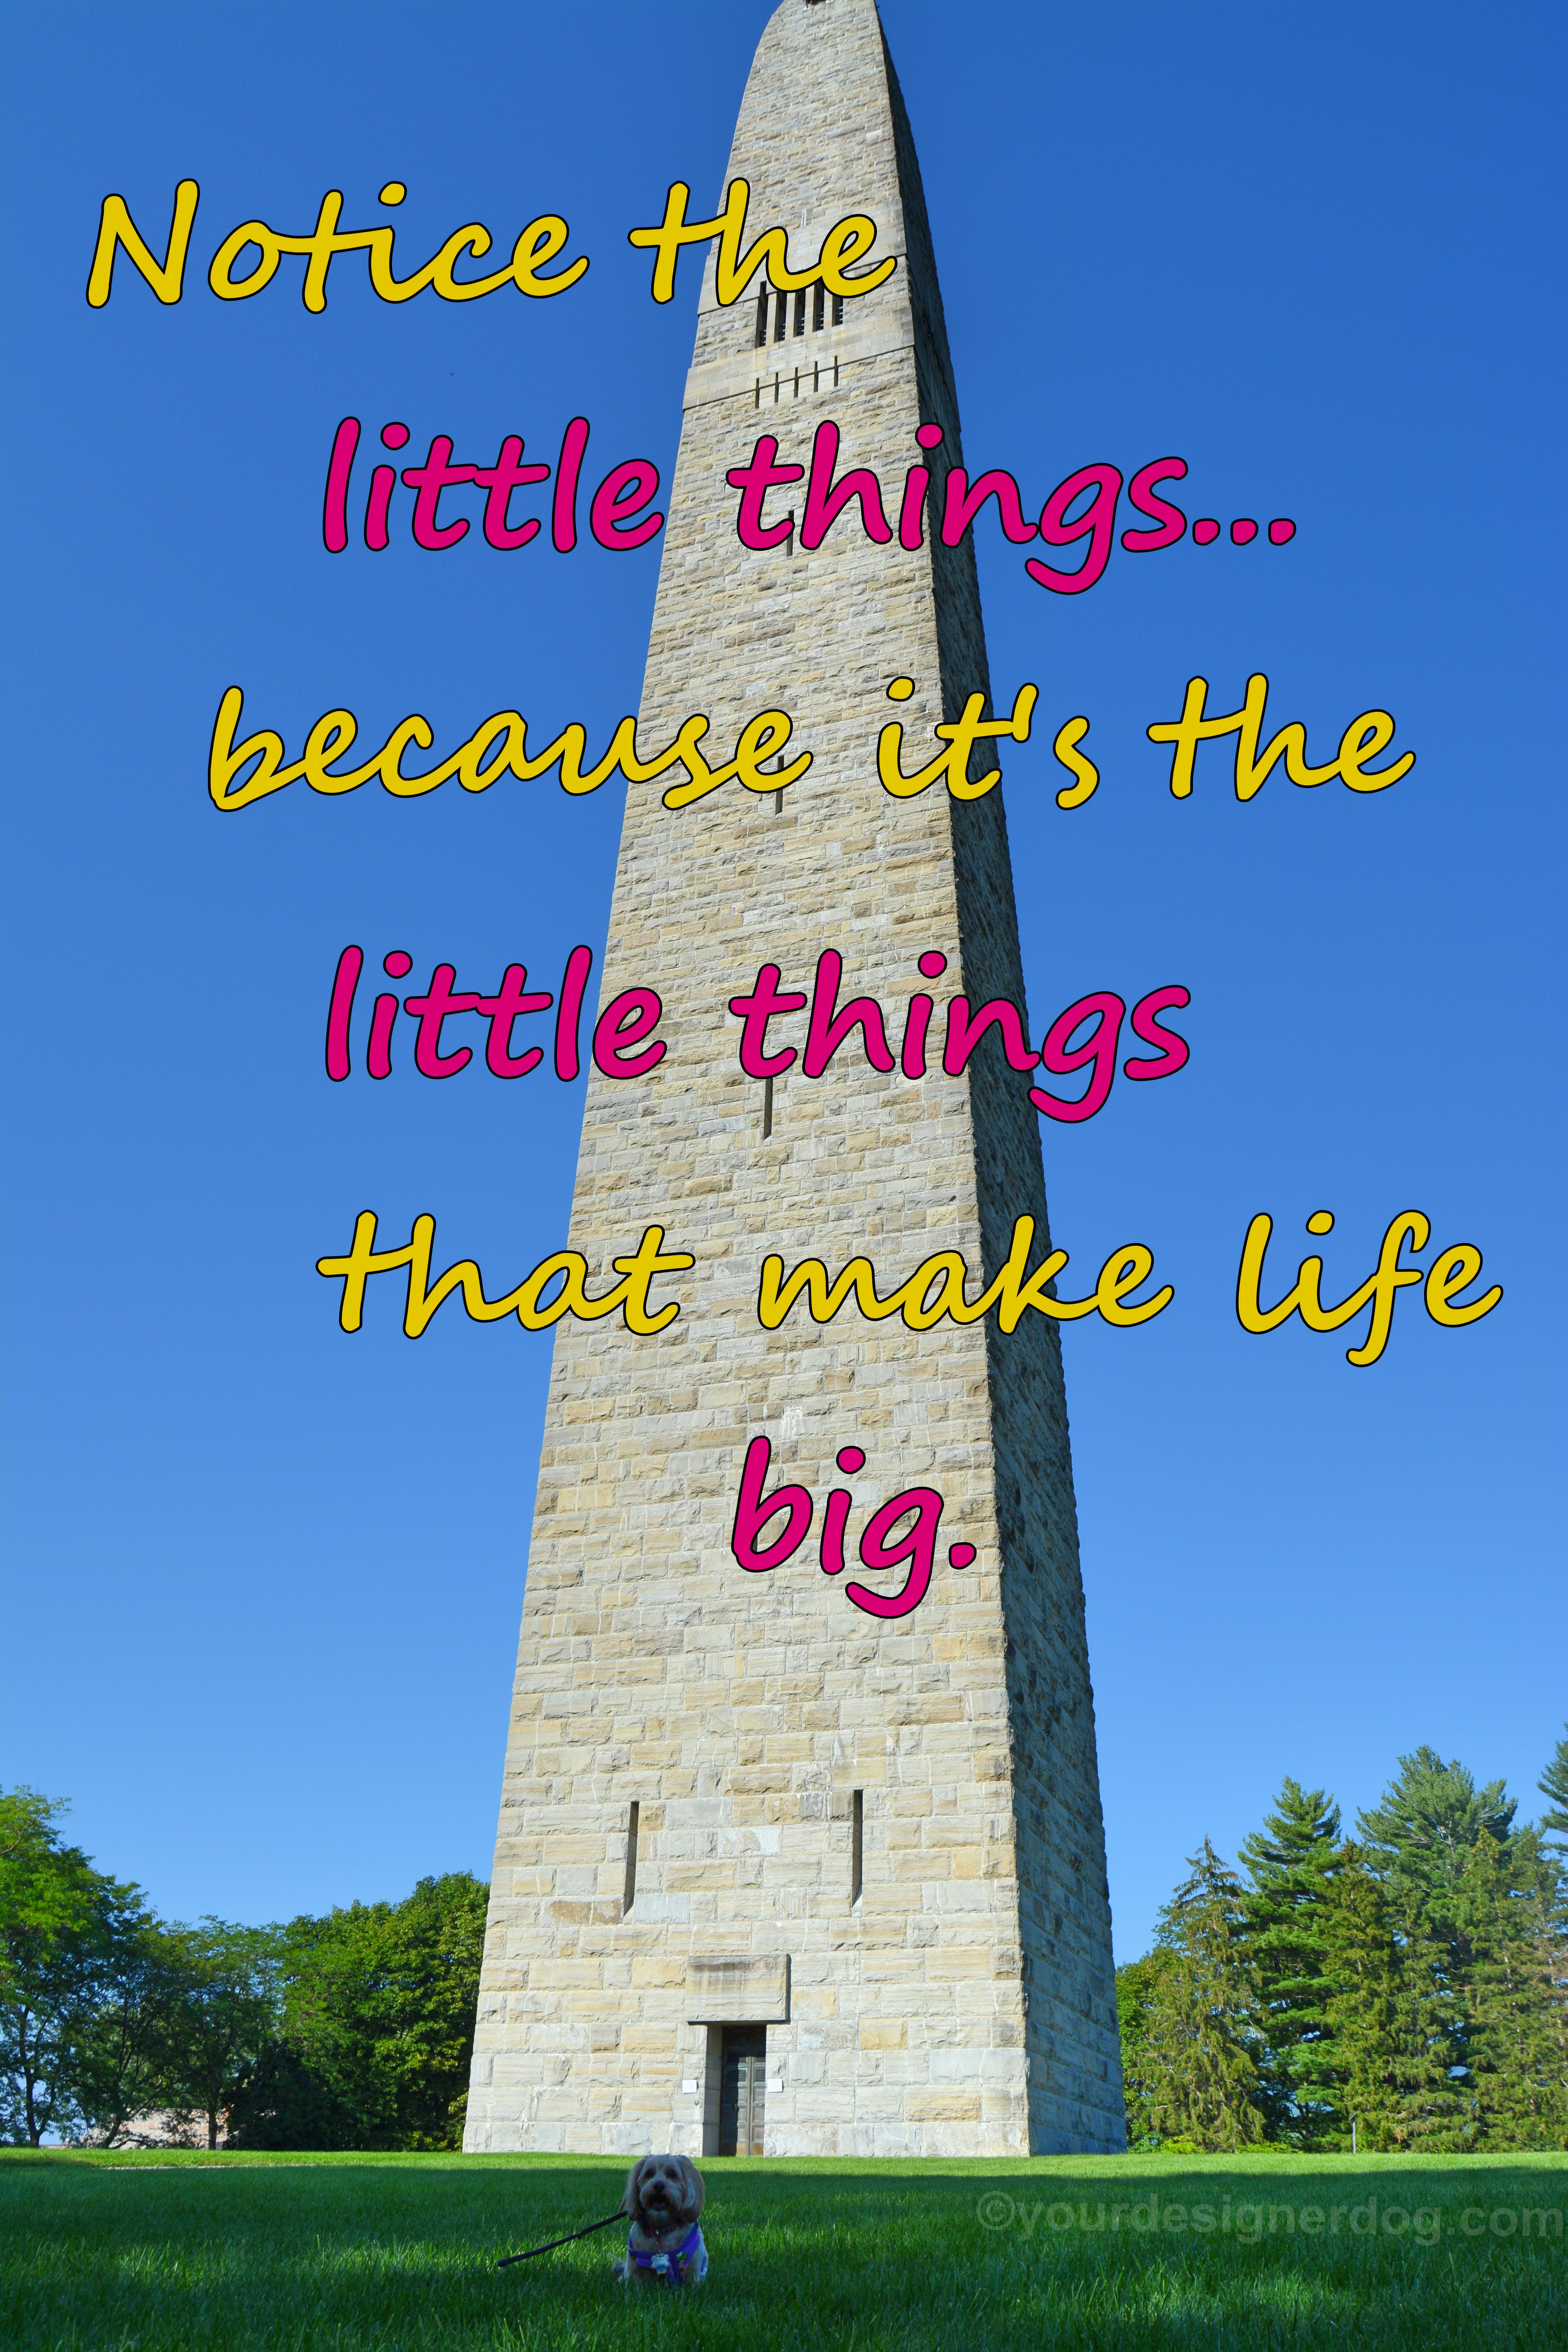 dogs, designer dogs, Yorkipoo, yorkie poo, little thing in life, monument